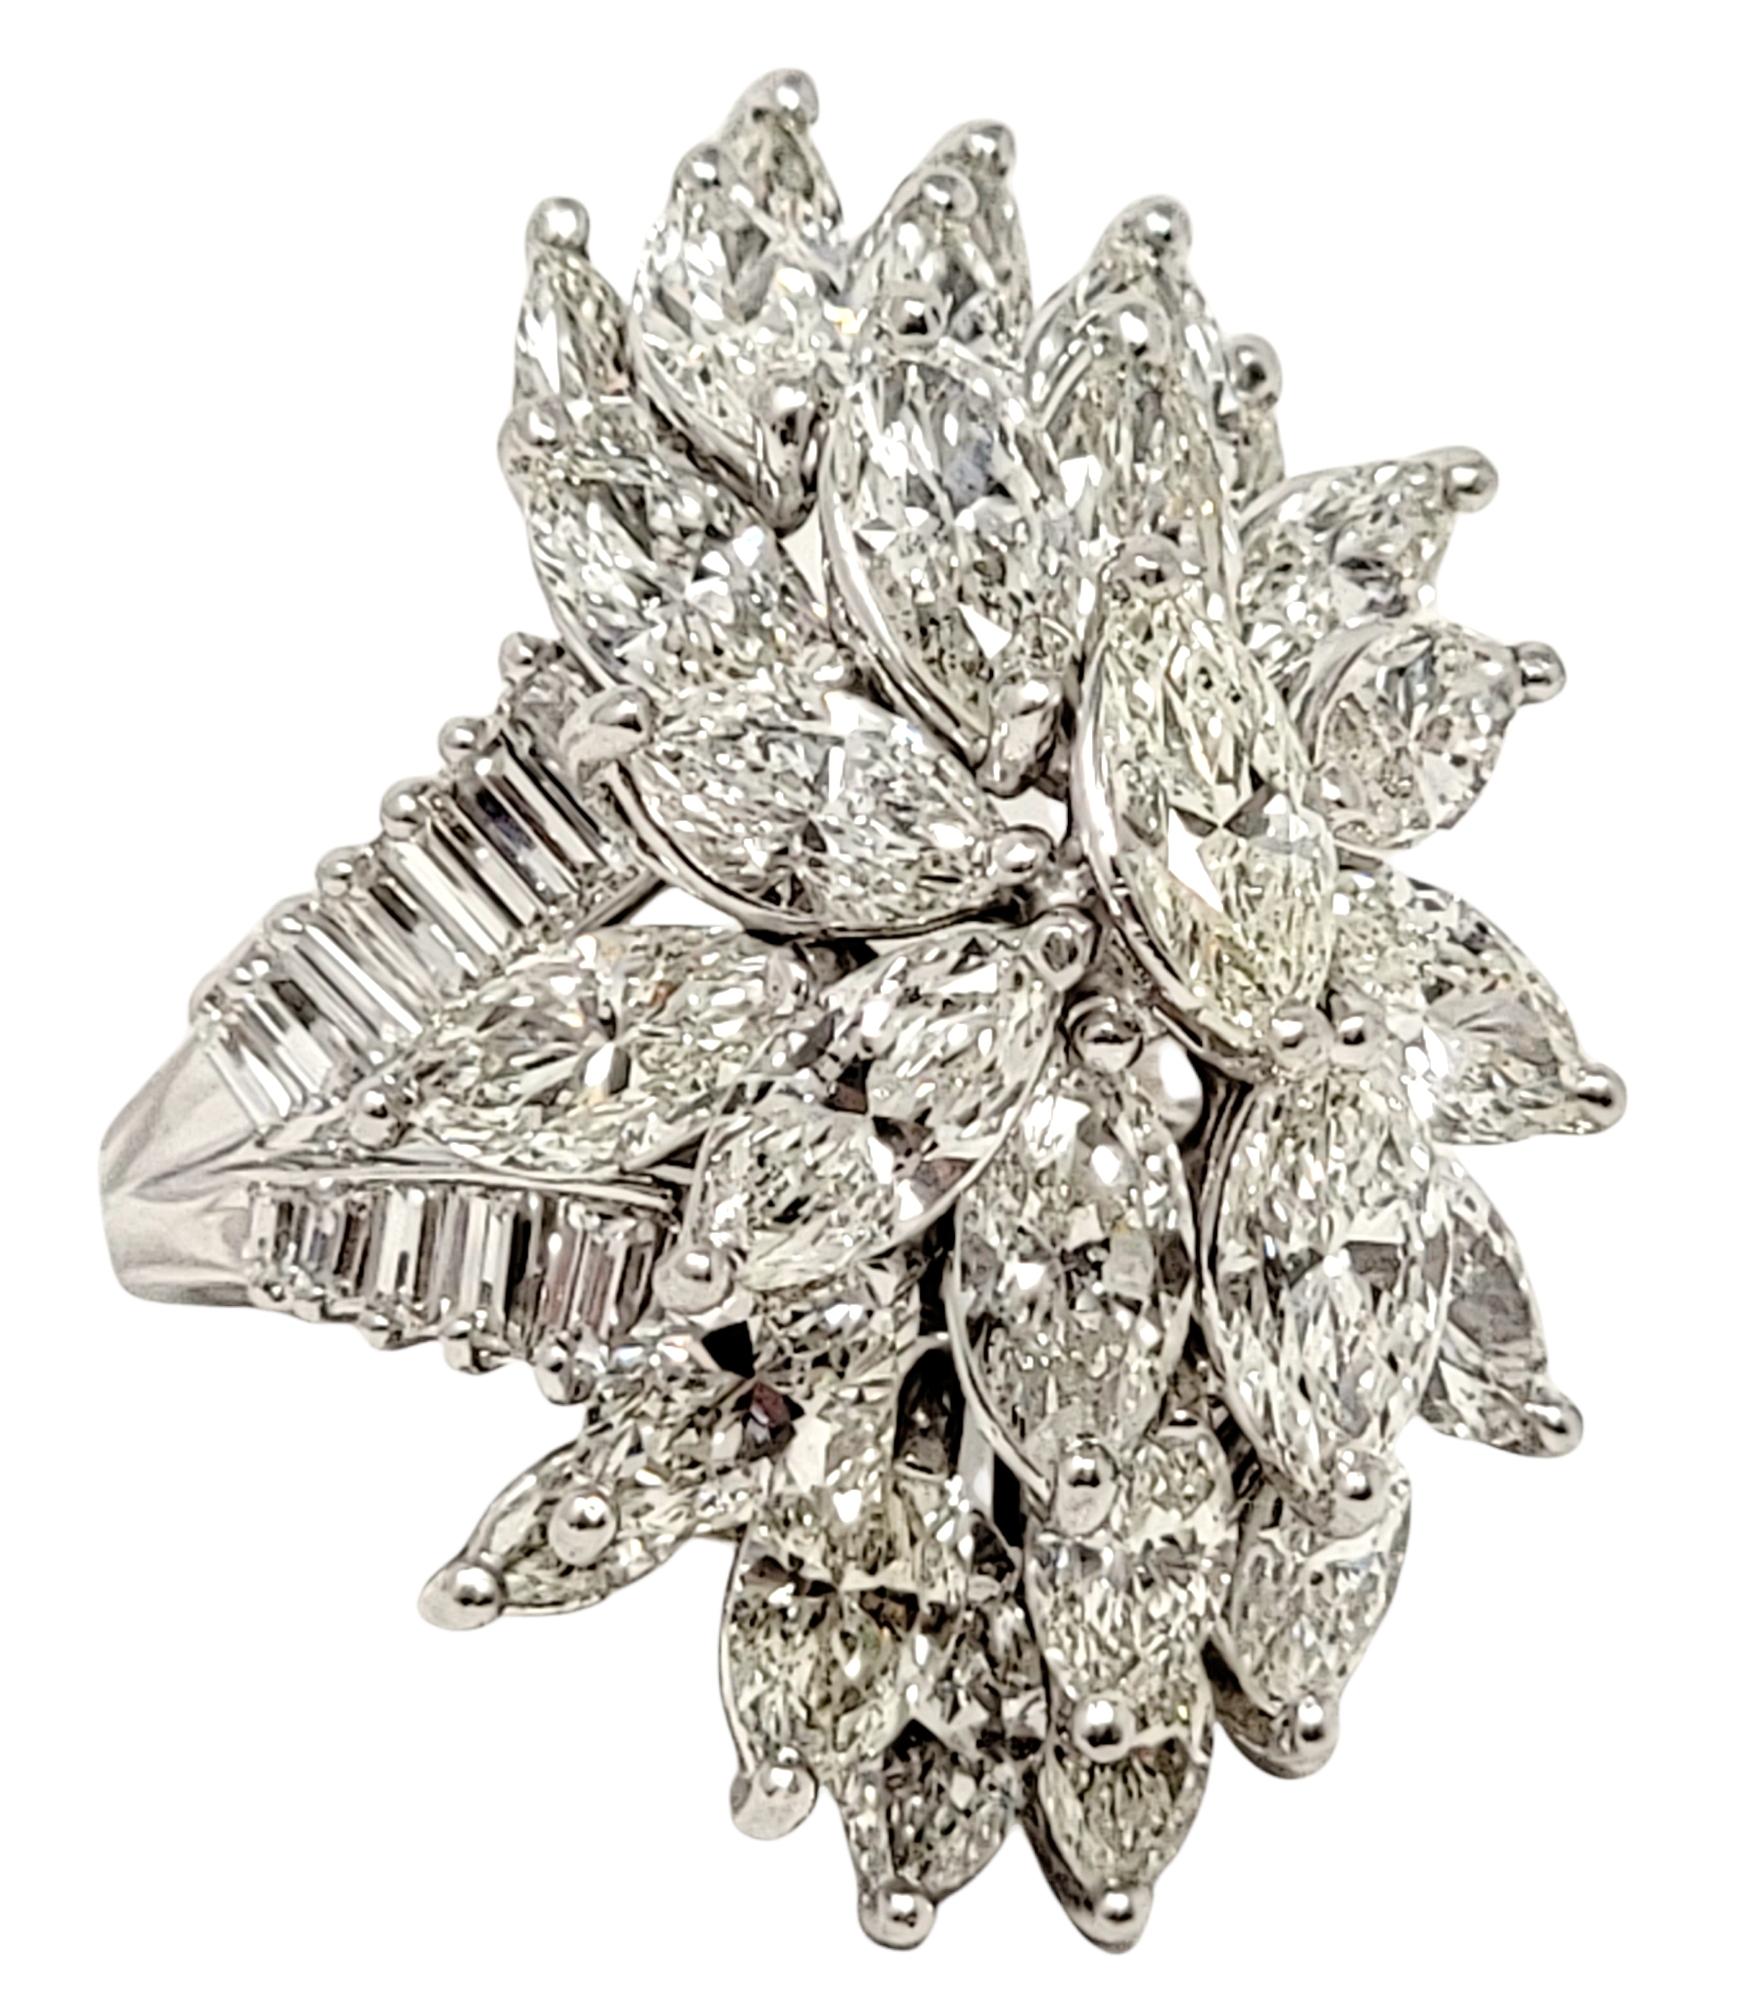 Ring size: 5

Breathtaking bold diamond cluster ring shimmers with incredible sparkle from every angle! The intricate tiered design of the glittering diamonds sits high off the finger, demanding the viewers attention. It features 29 marquis